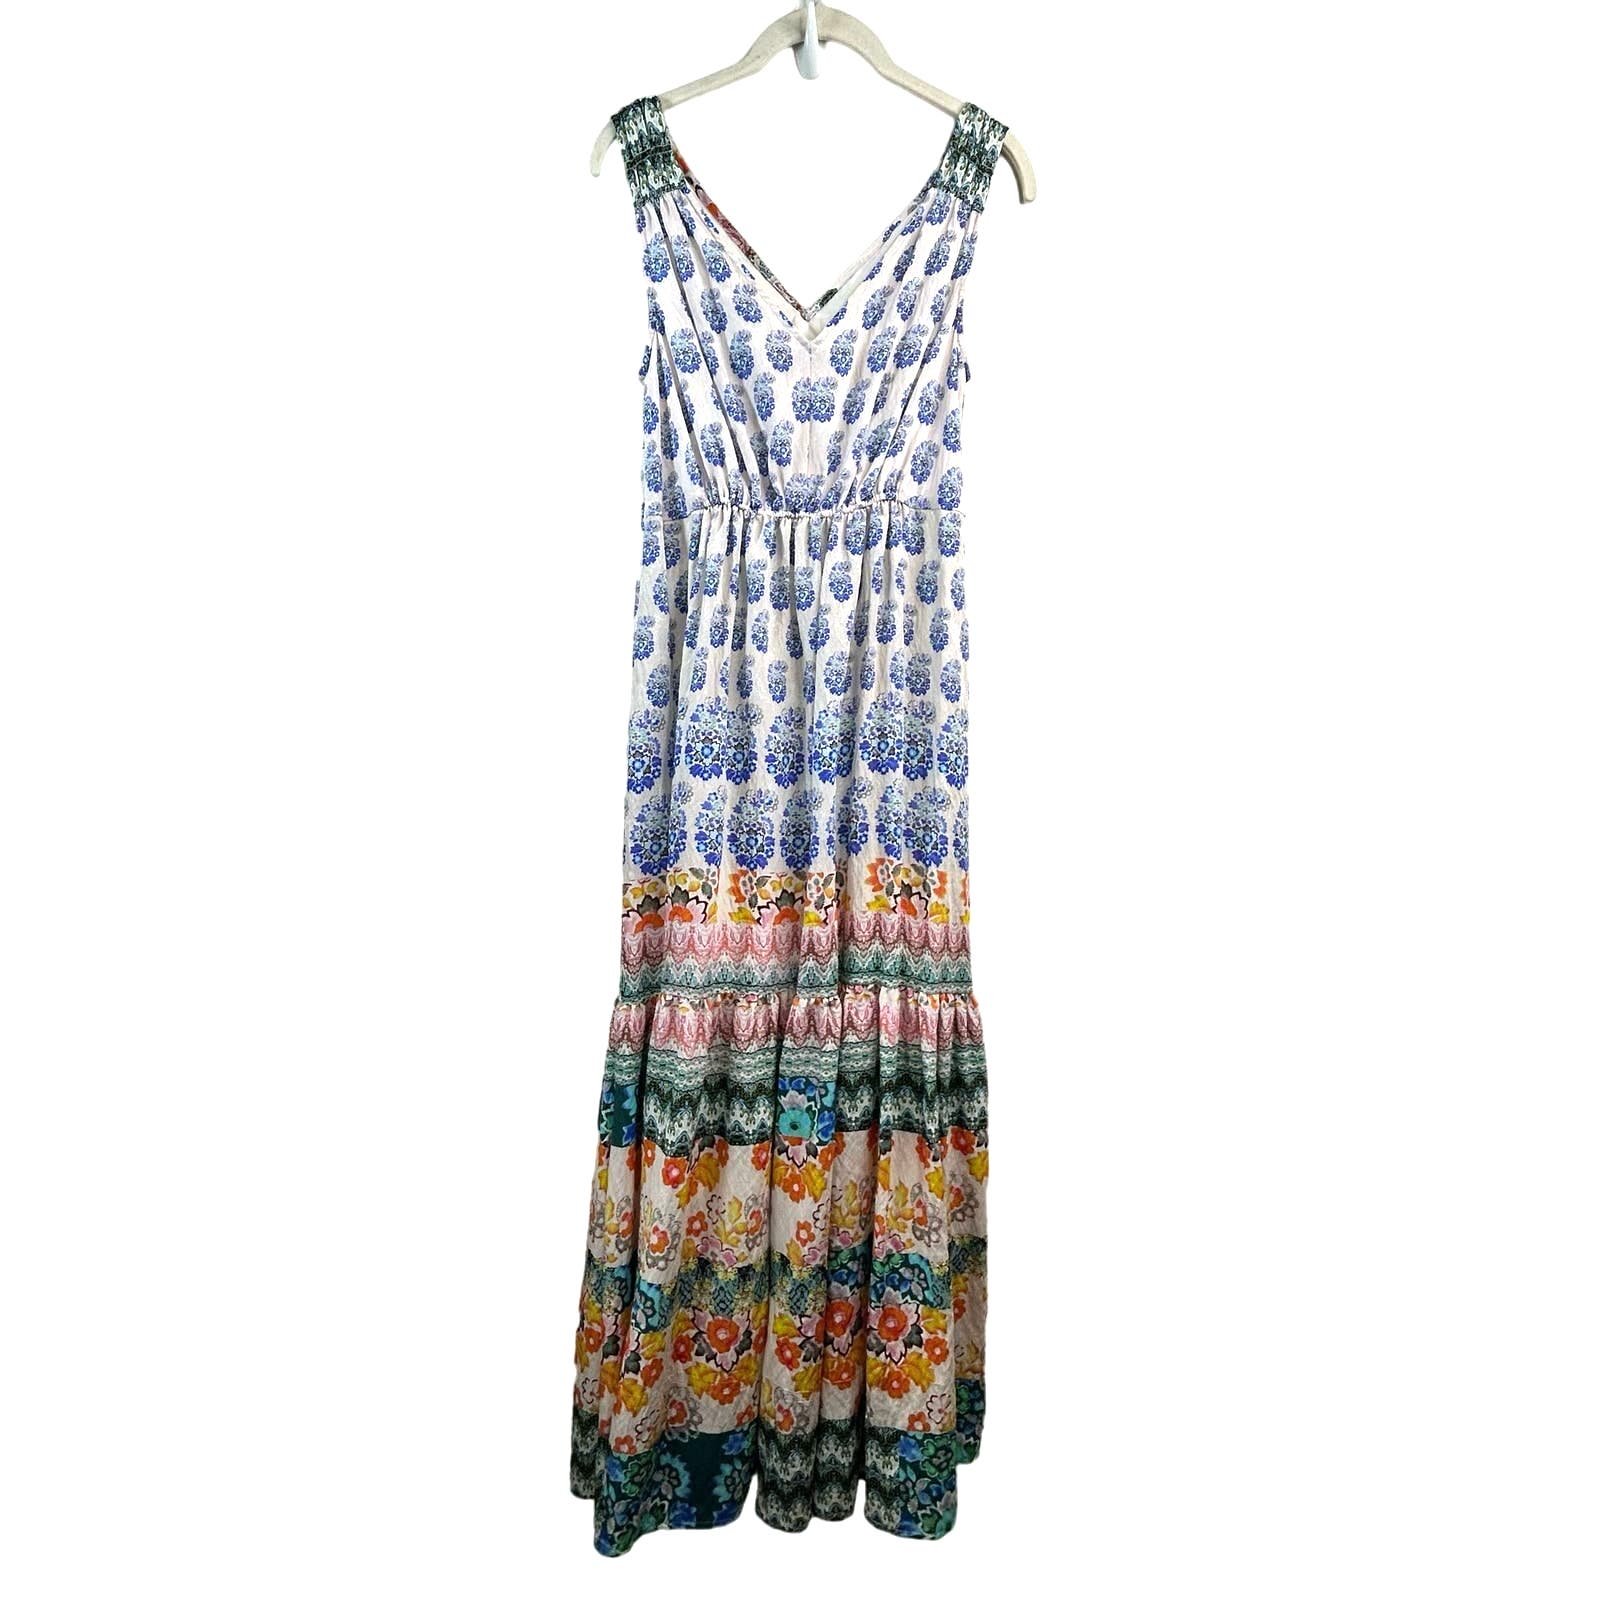 Discounted By Anthropologie Boho Pheasant Cottagecore Gathered Tiered Maxi Dress X-Small P ivE1bYqxQ Counter Genuine 